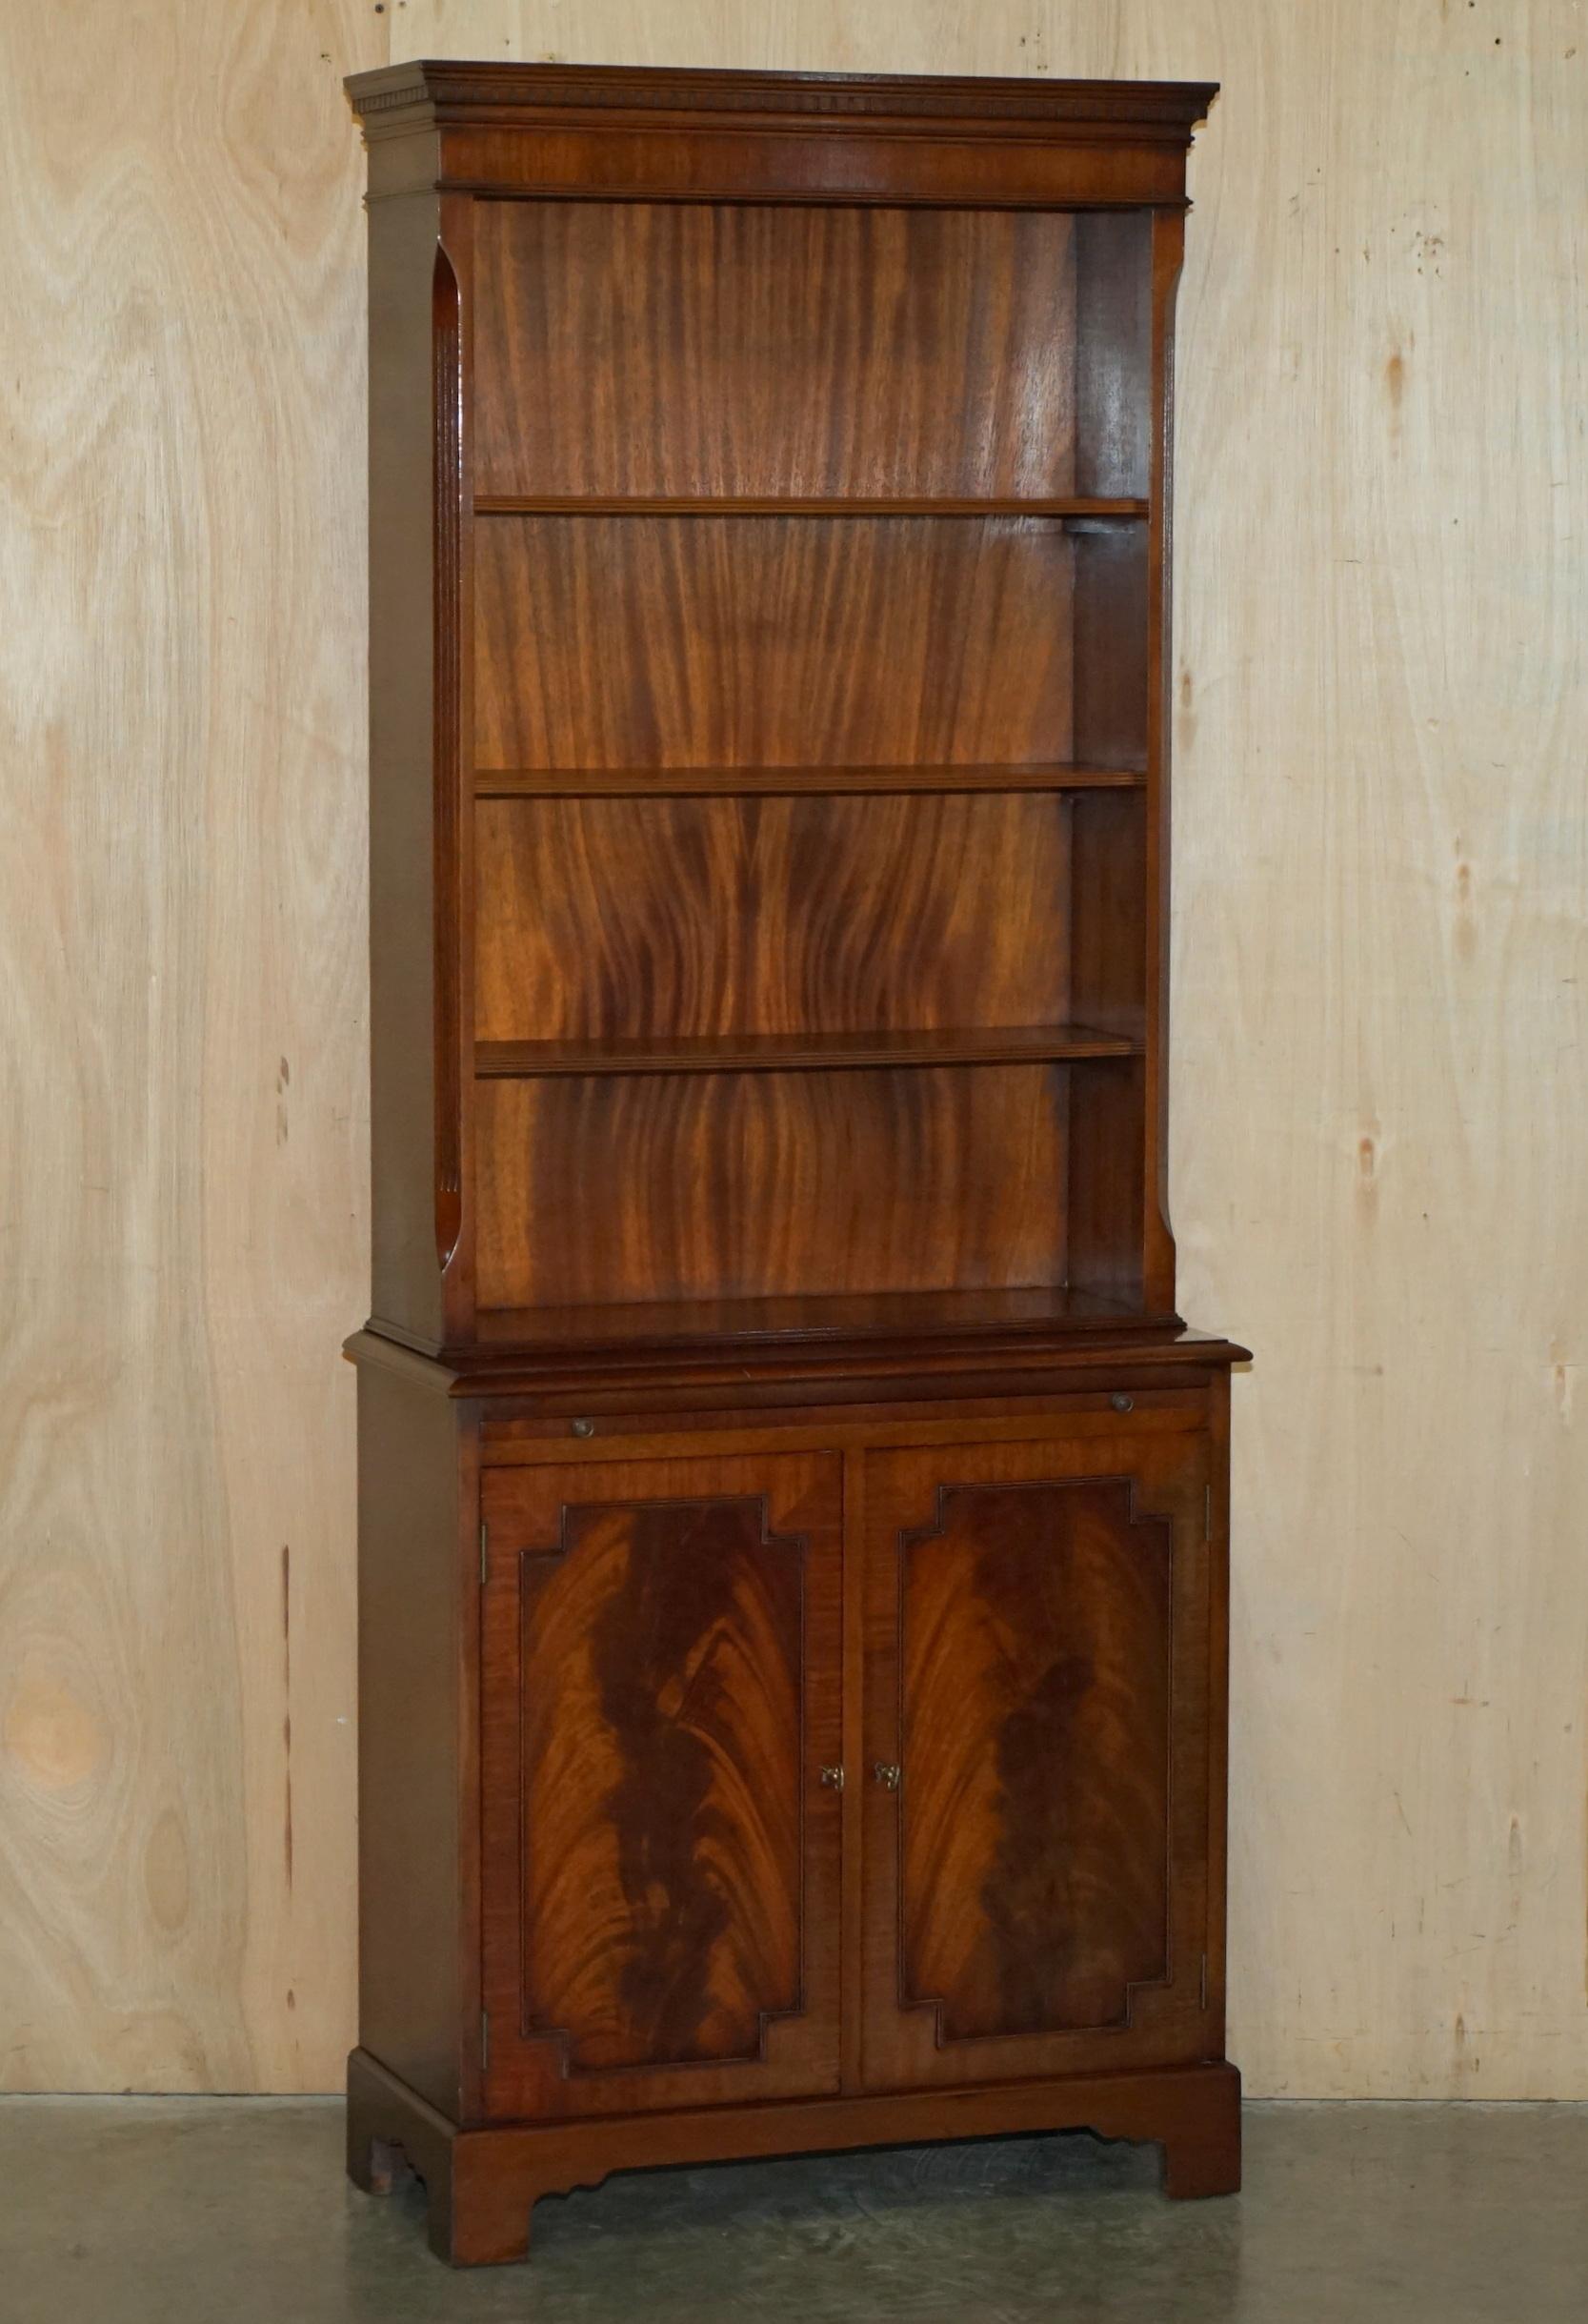 Royal House Antiques

Royal House Antiques is delighted to offer for sale this absolutely stunning pair of vintage flamed Mahogany bookcases with cupboard bases and butlers slip serving shelves ideally suited as drinks cabinets 

Please note the